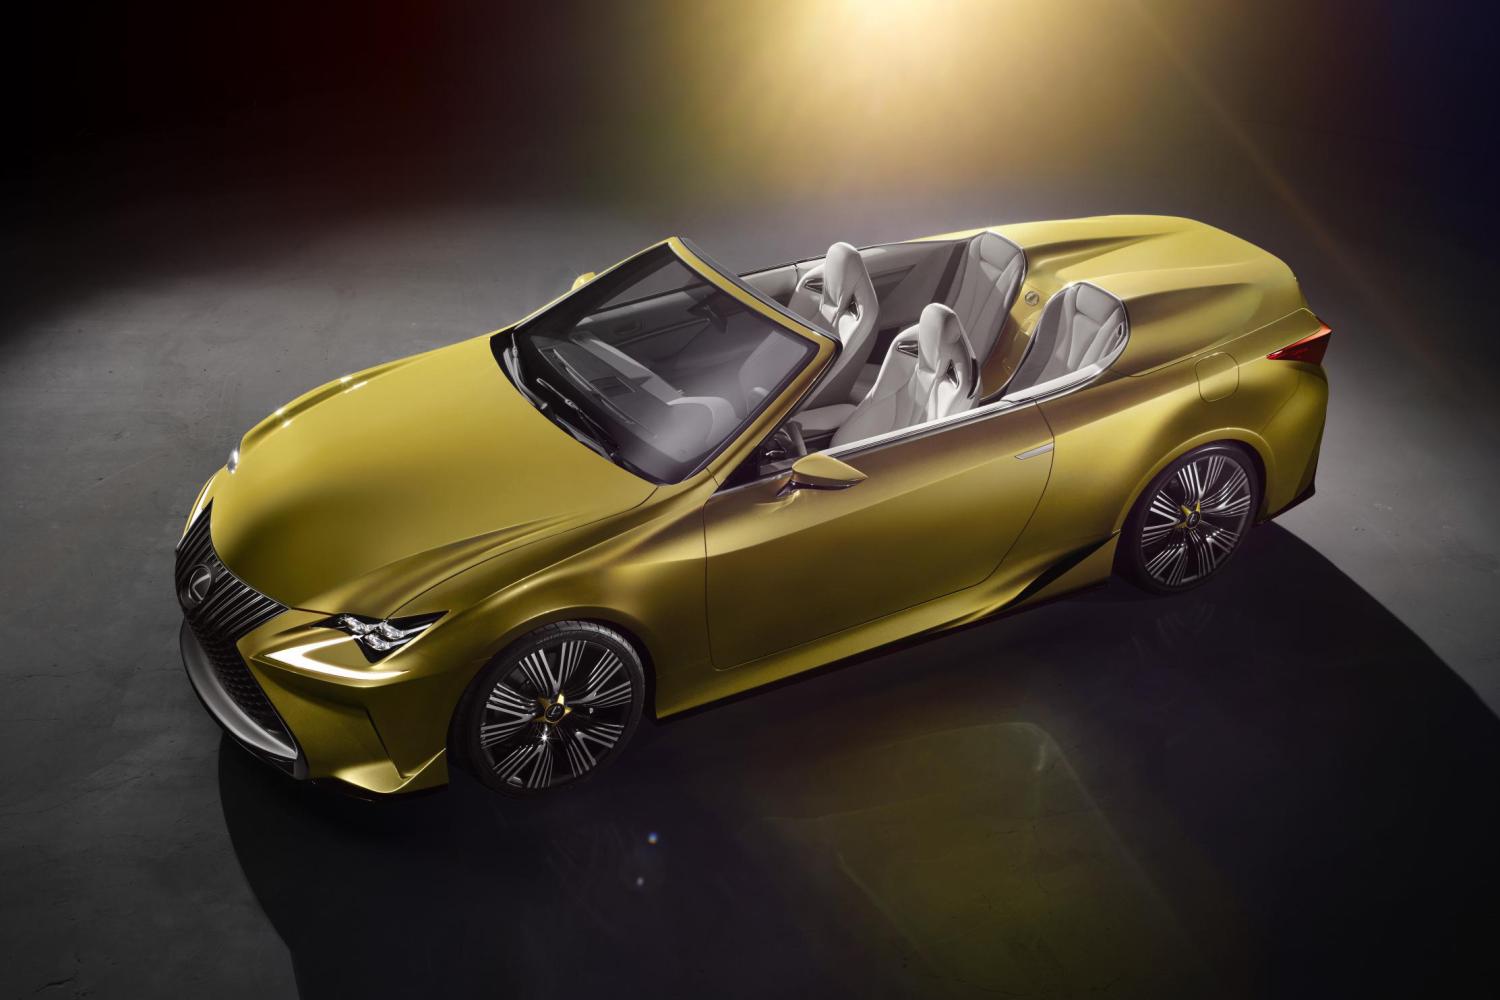 New Twin-Turbo 600bhp V8 And A Roof Chop Slated For The Lexus LC